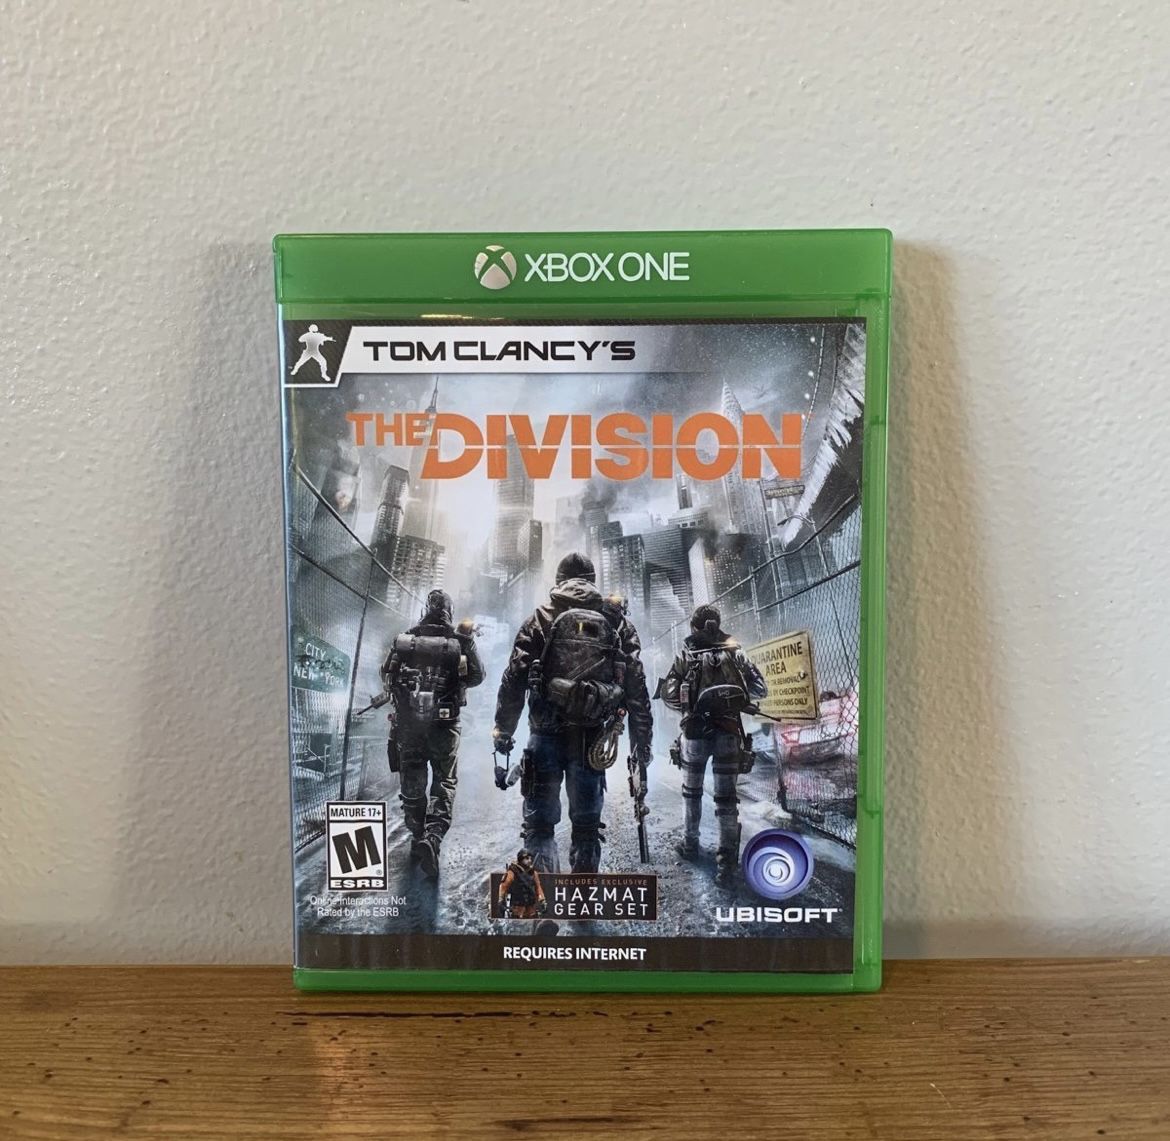 The Division Xbox One Like New Complete Tom Clancy’s Video Game